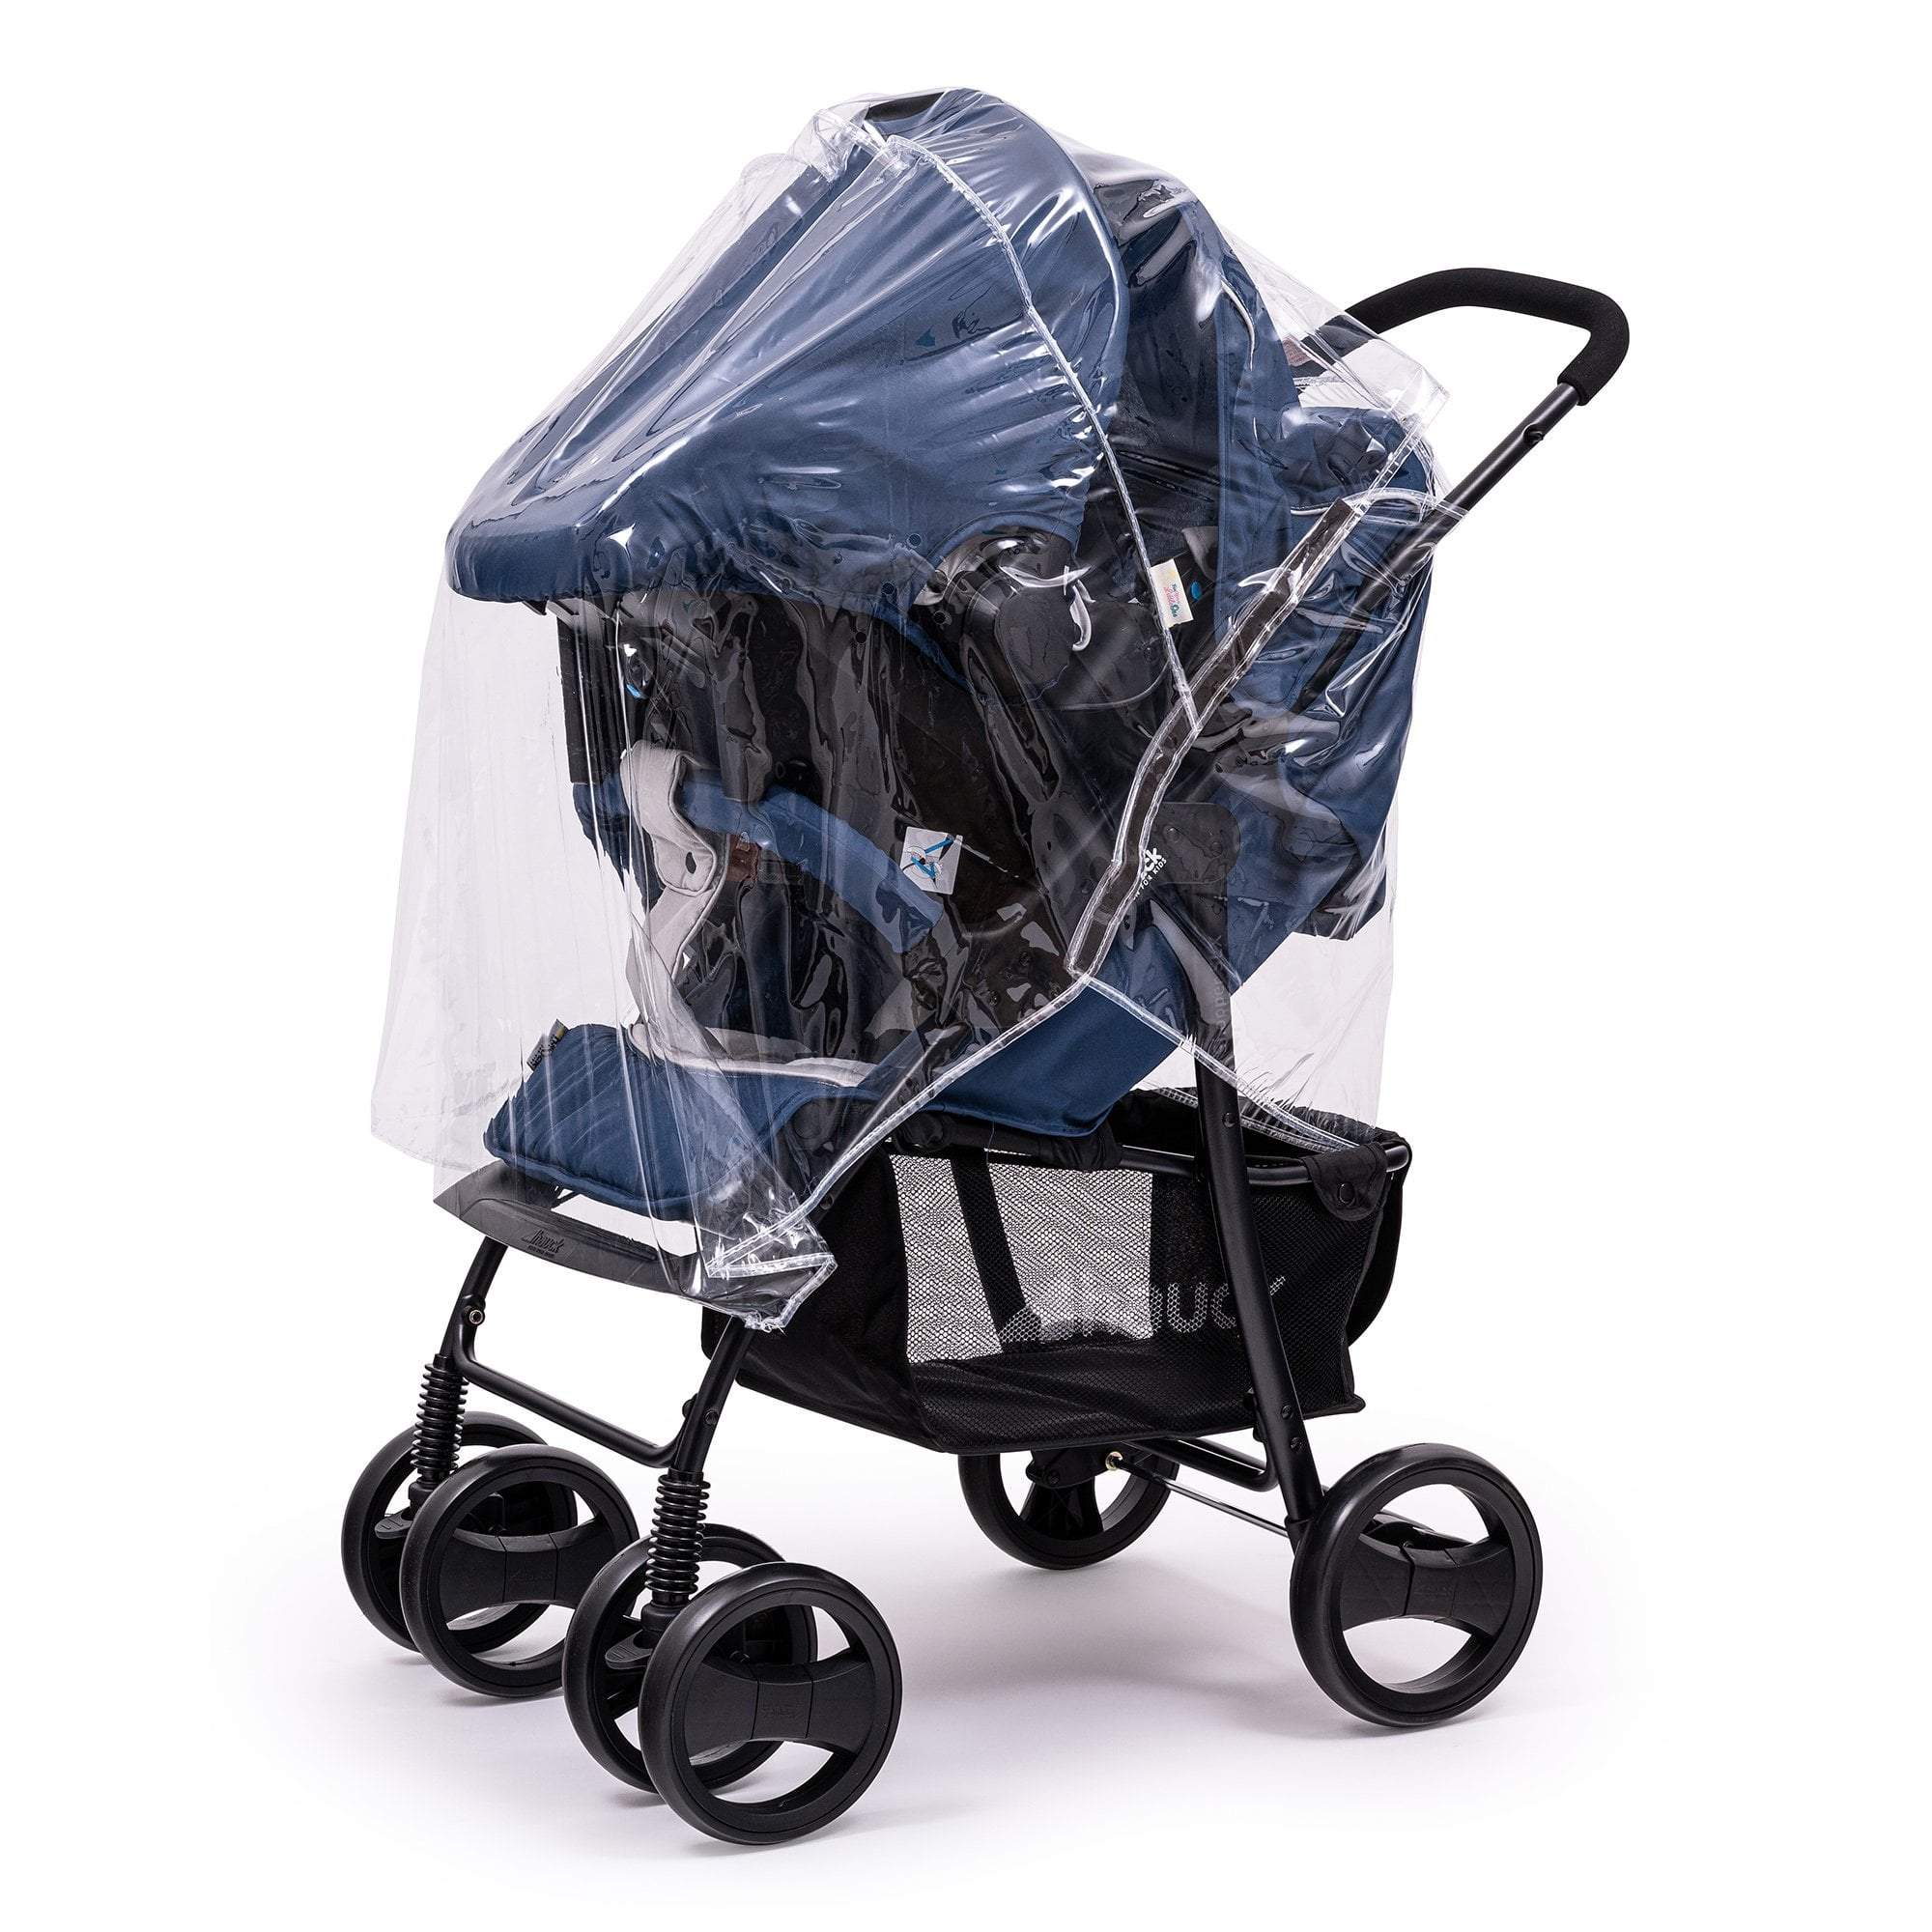 Travel System Raincover Compatible with Pericles - Fits All Models - For Your Little One